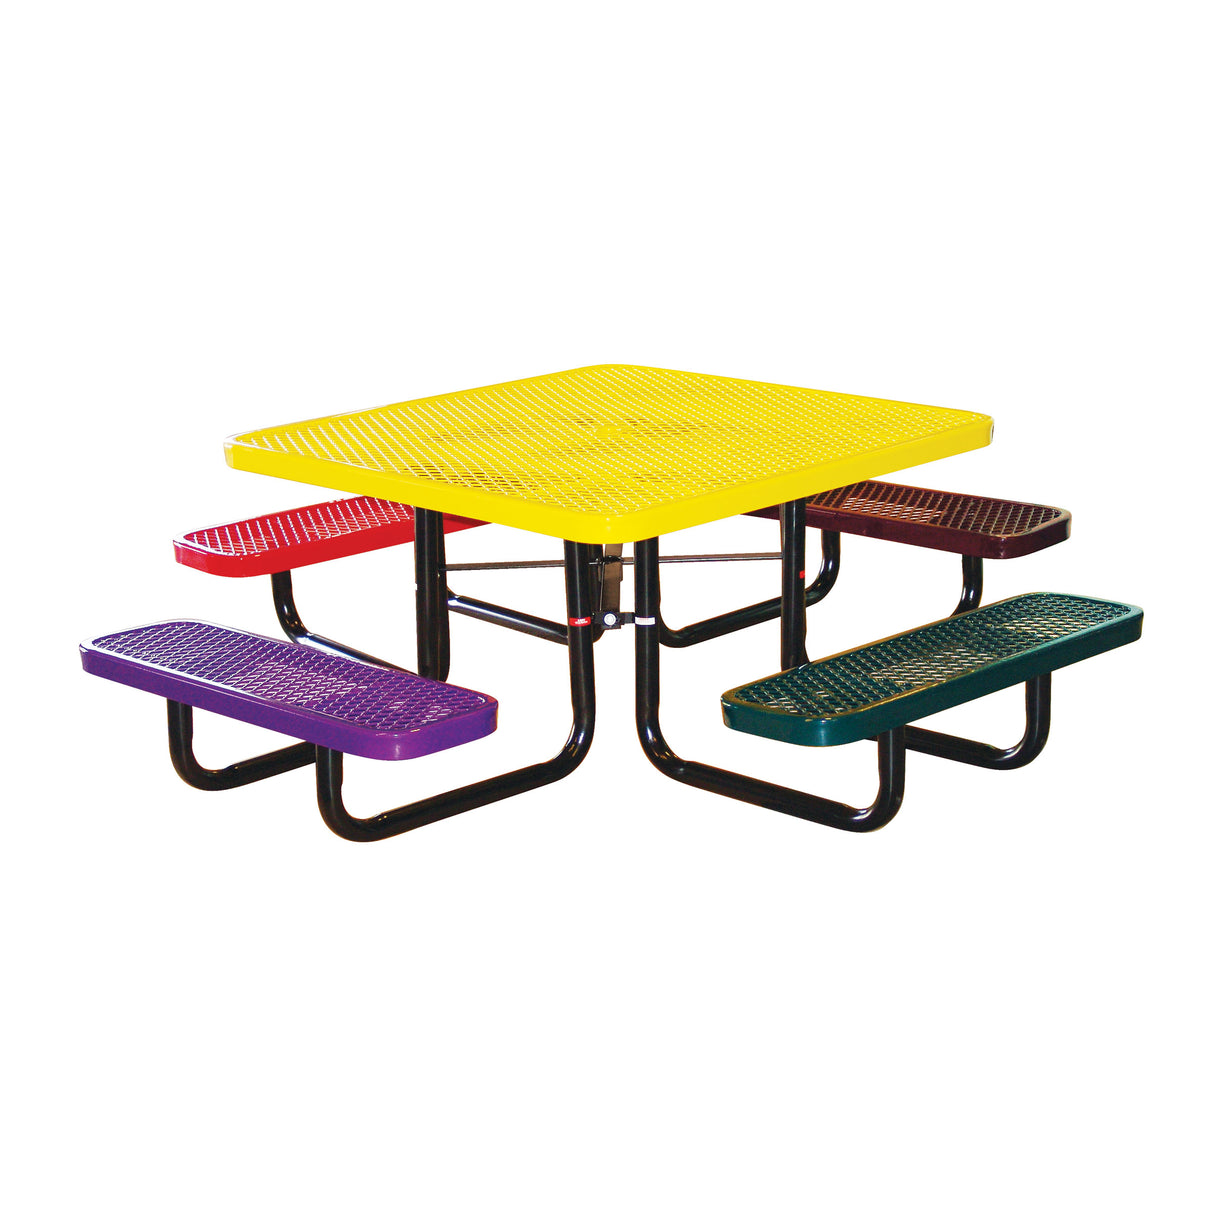 46" Square Expanded Metal Children’s Tables